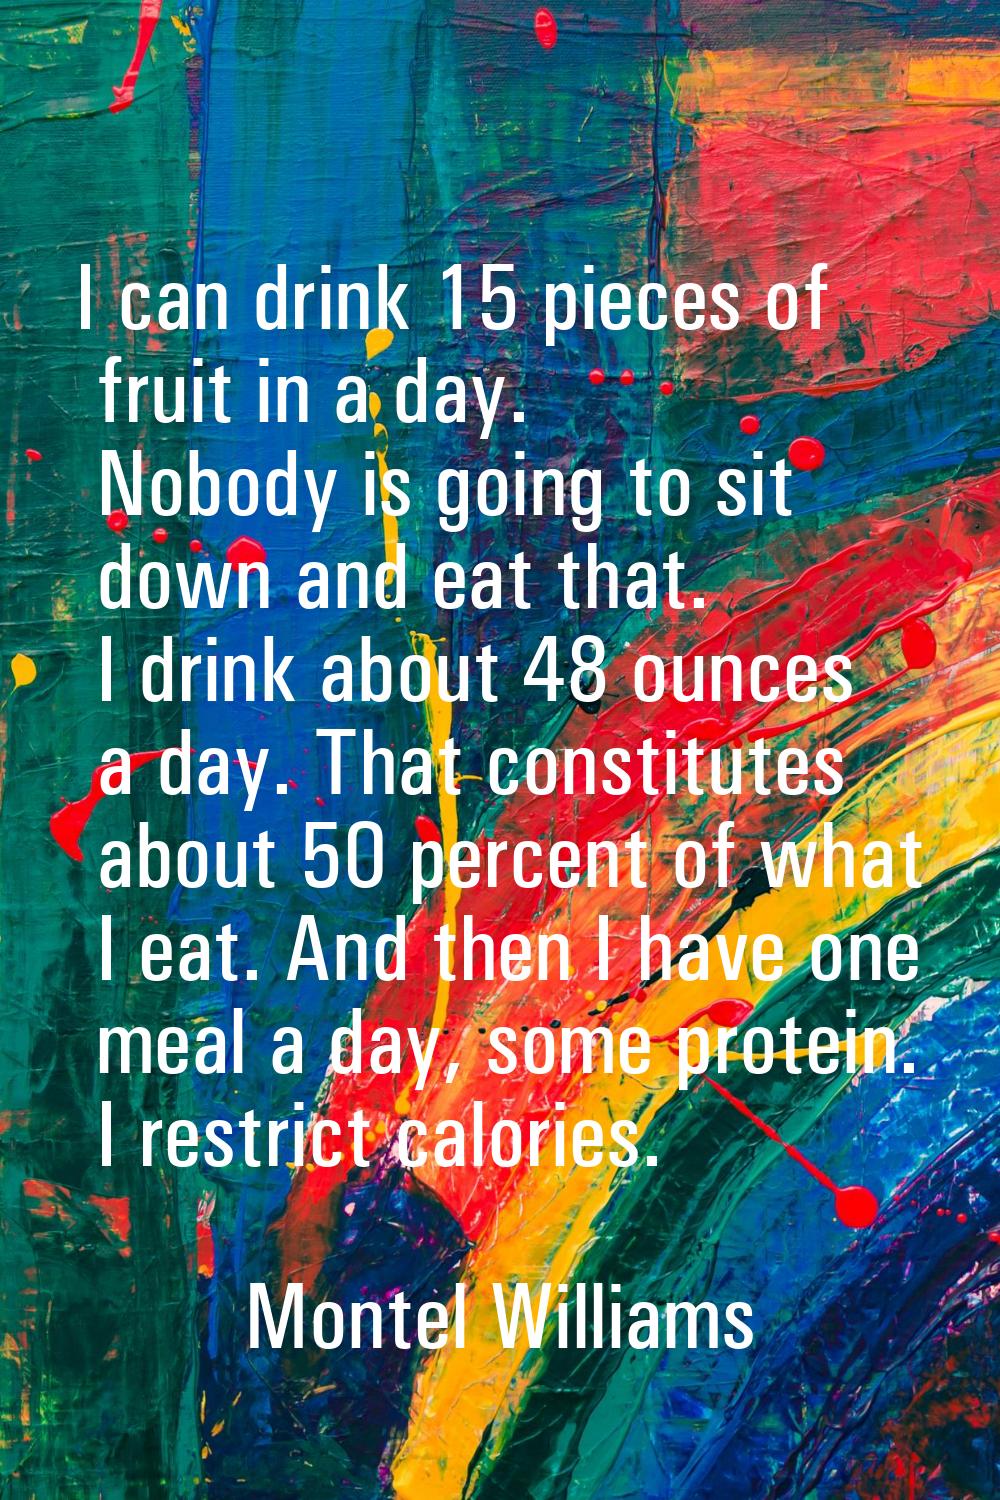 I can drink 15 pieces of fruit in a day. Nobody is going to sit down and eat that. I drink about 48